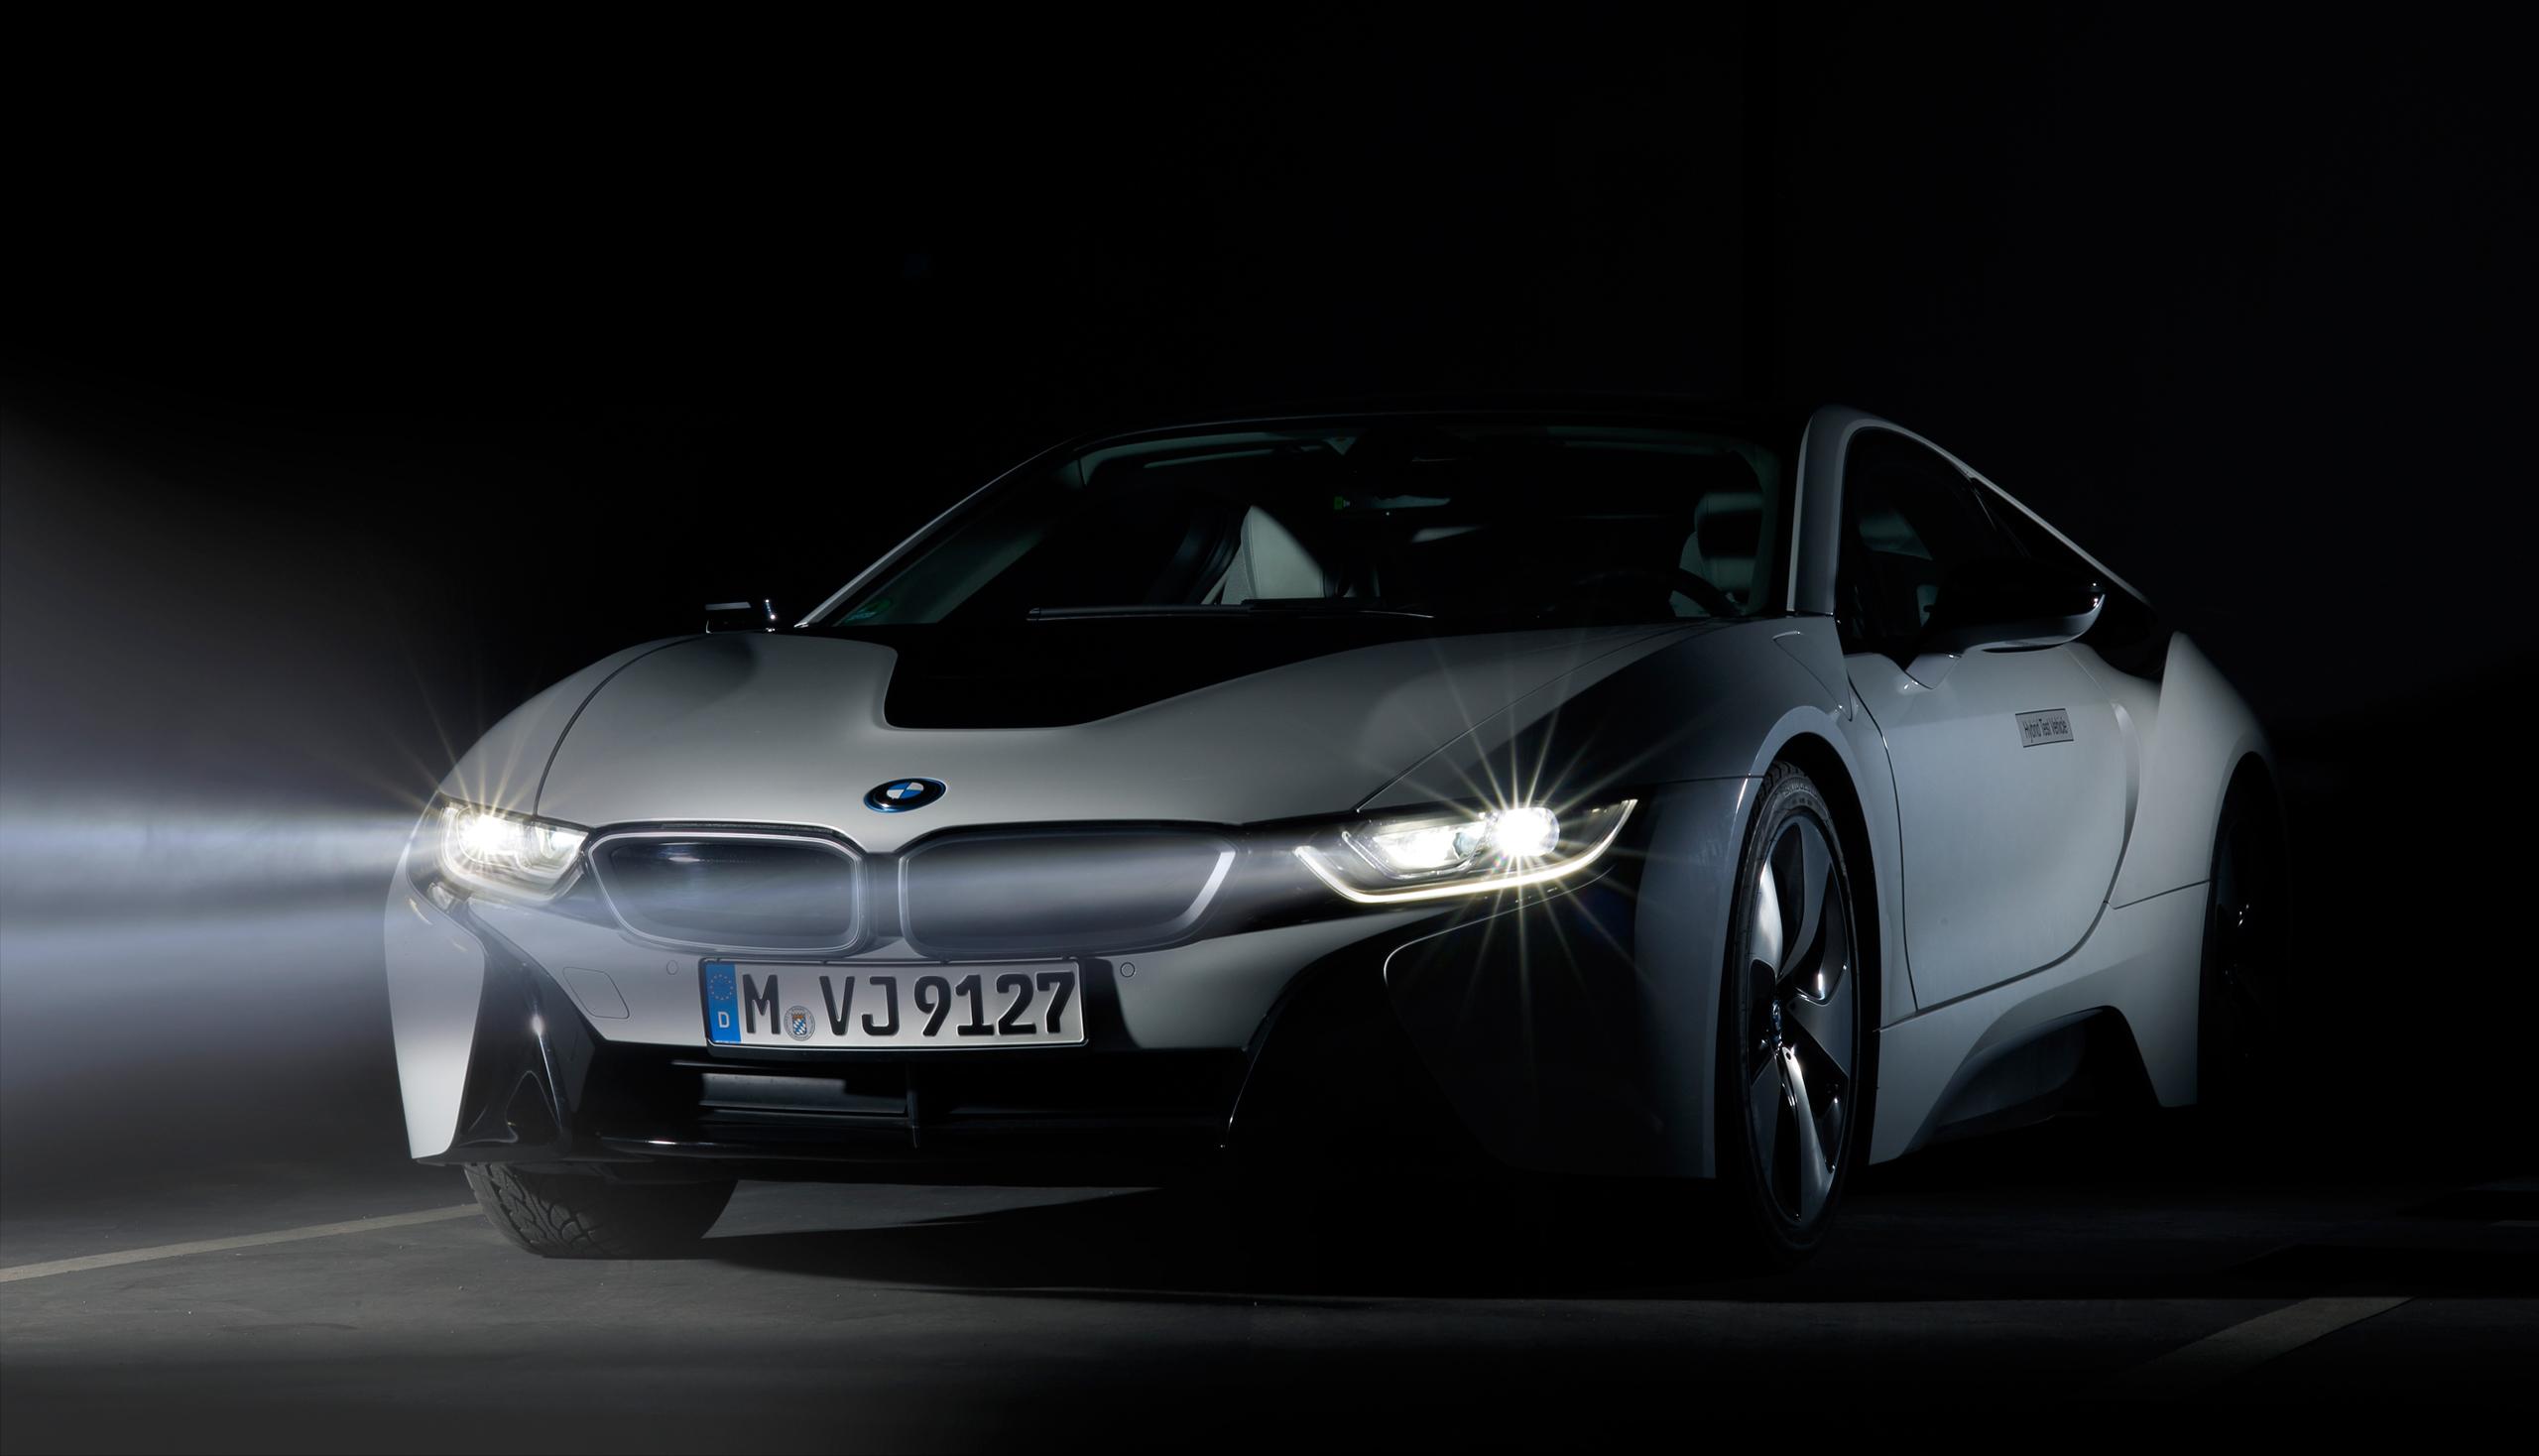 BMW i8 Headlights Picture Wallpaper 64654 2560x1468px